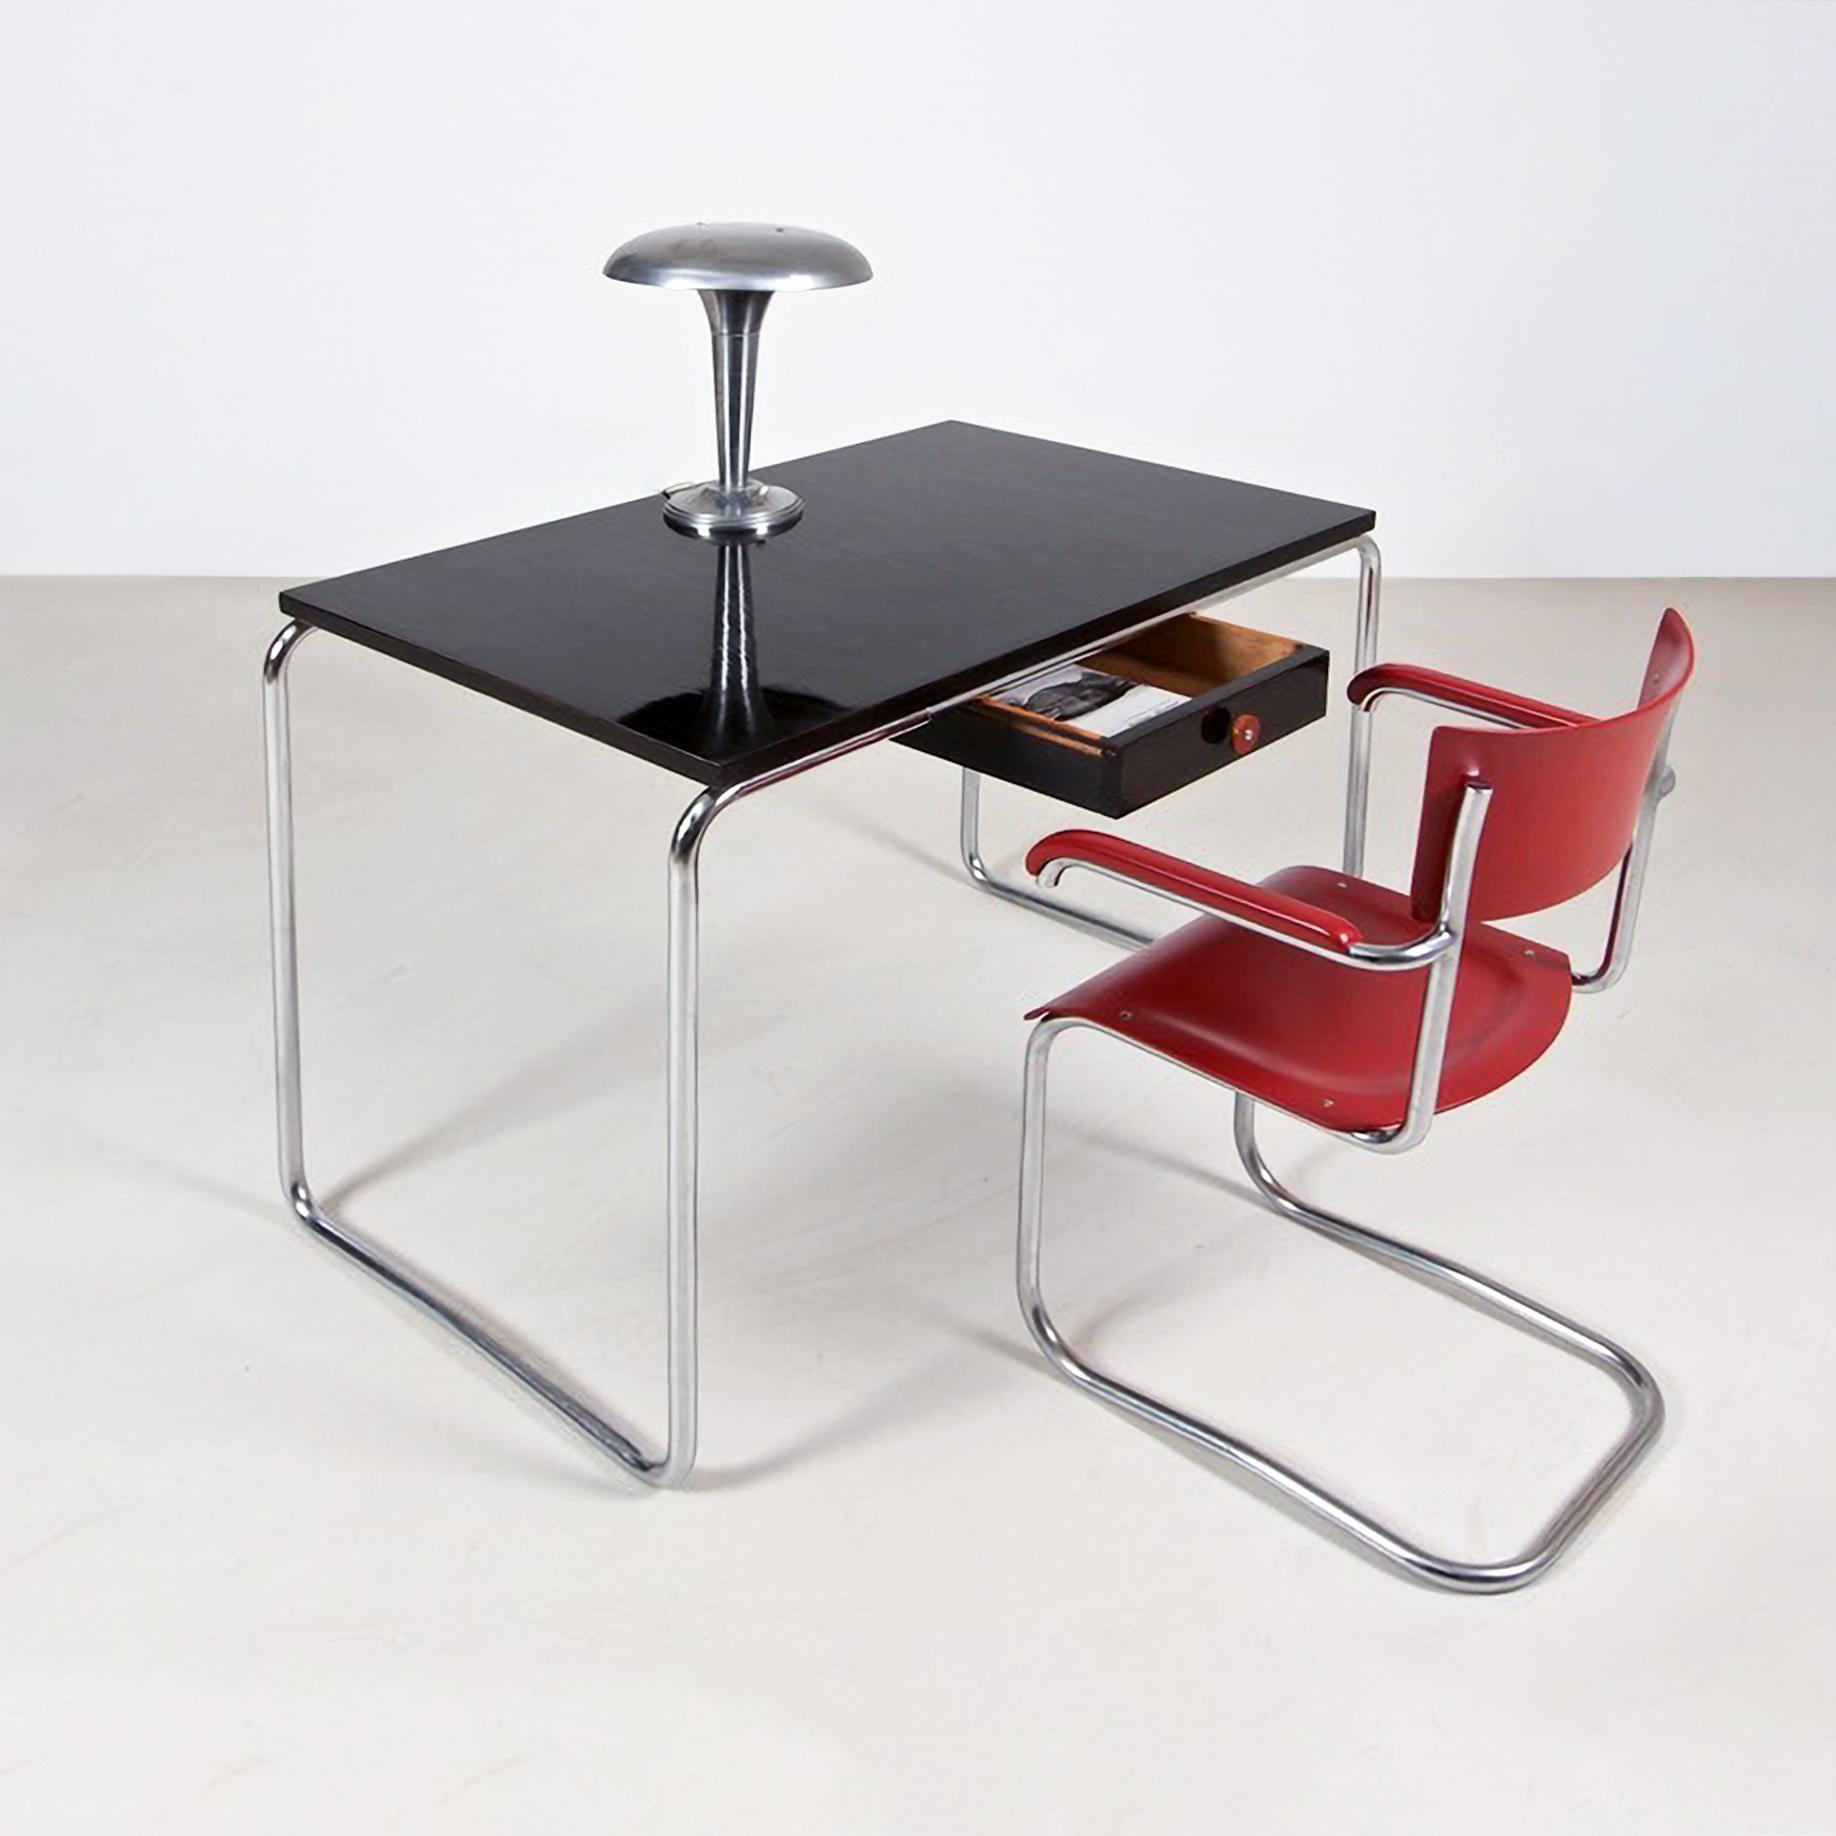 Bespoke Modernist Tubular Steel Table in Chromed Metal and Glossy Lacquered Wood In New Condition For Sale In Berlin, DE